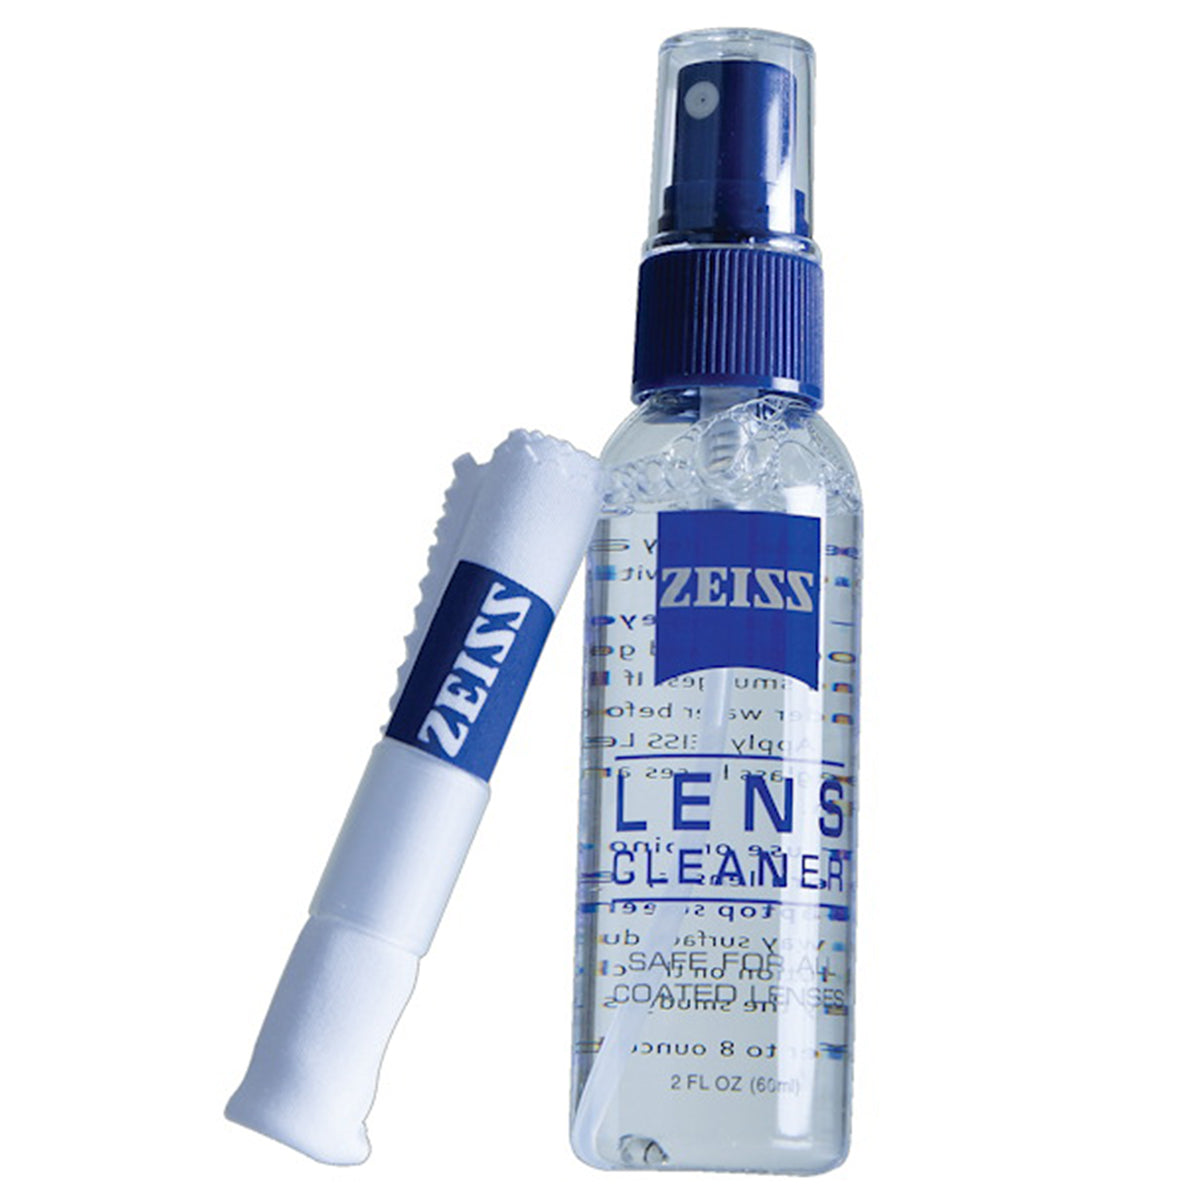 Zeiss Lens Cleaning Kit 2 oz in Zeiss Lens Cleaning Kit 2 oz by Zeiss | Optics - goHUNT Shop by GOHUNT | Zeiss - GOHUNT Shop